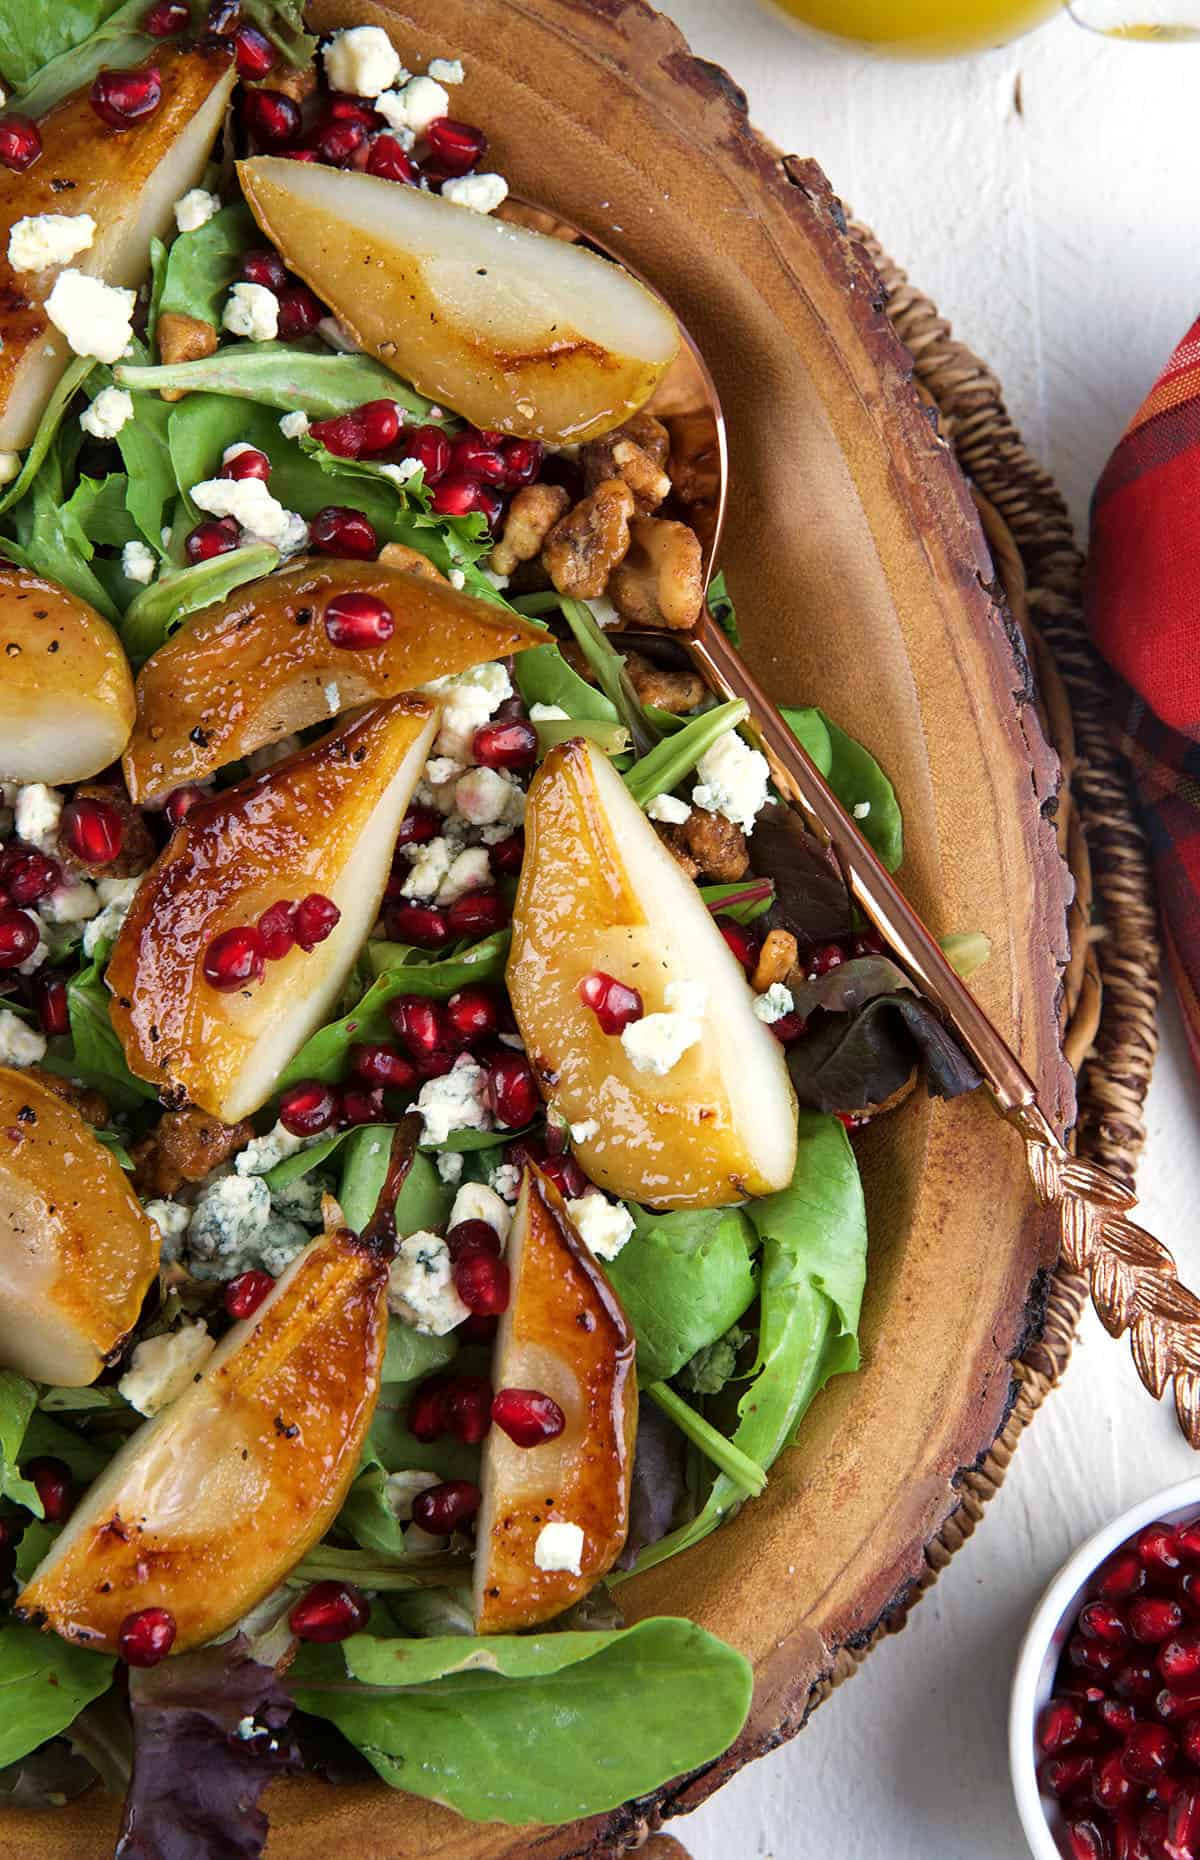 Roasted pear Salad in a wood bowl with a copper spoon for serving.